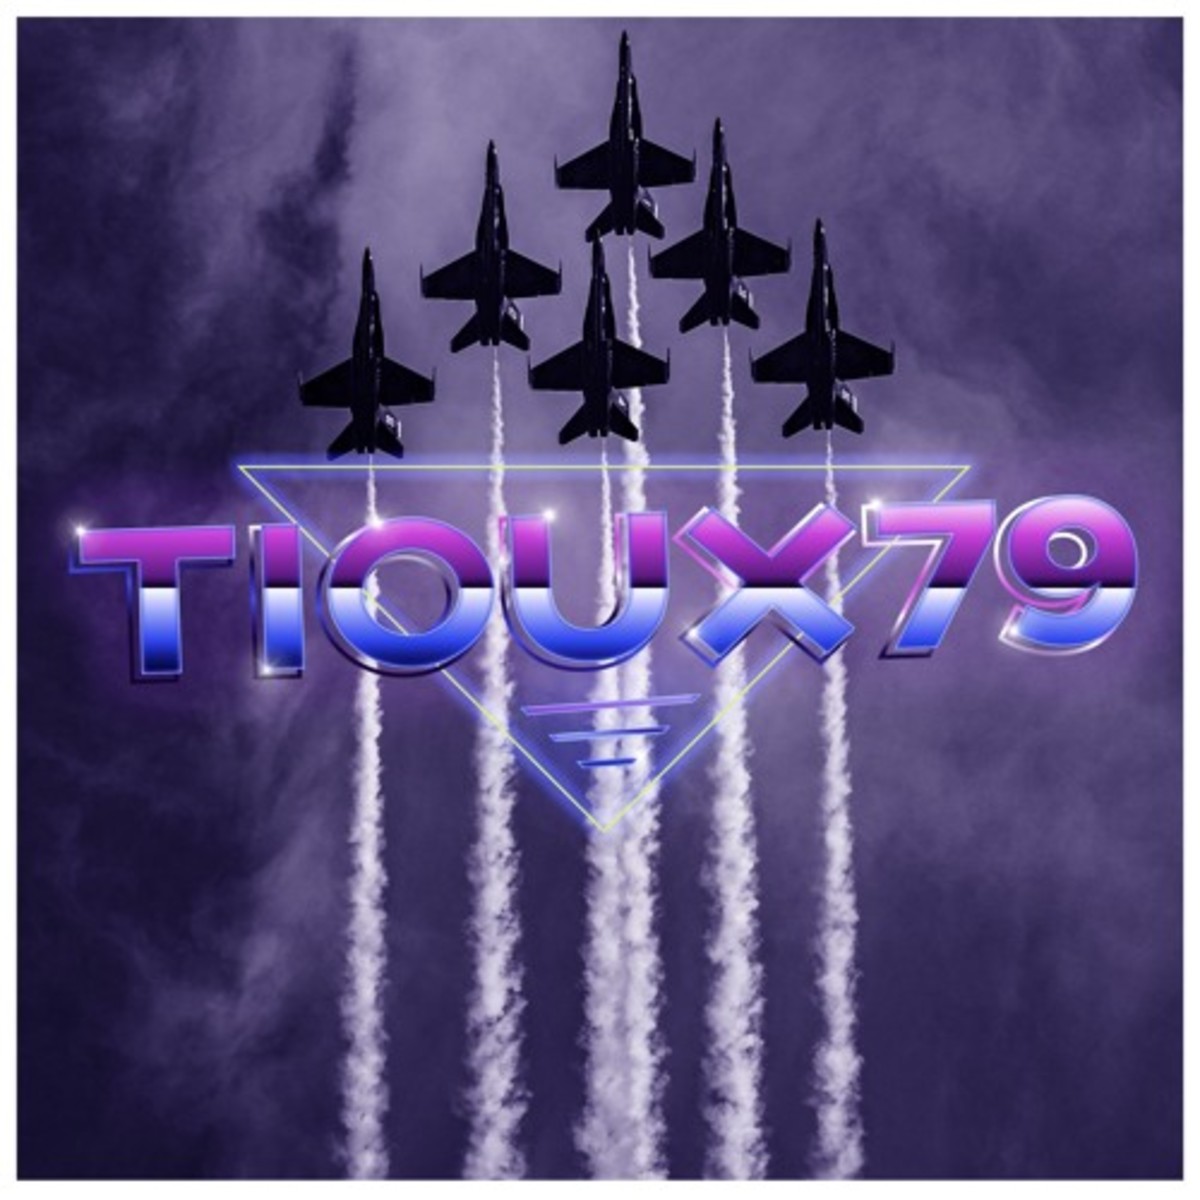 synth-single-review-top-jet-by-tioux79